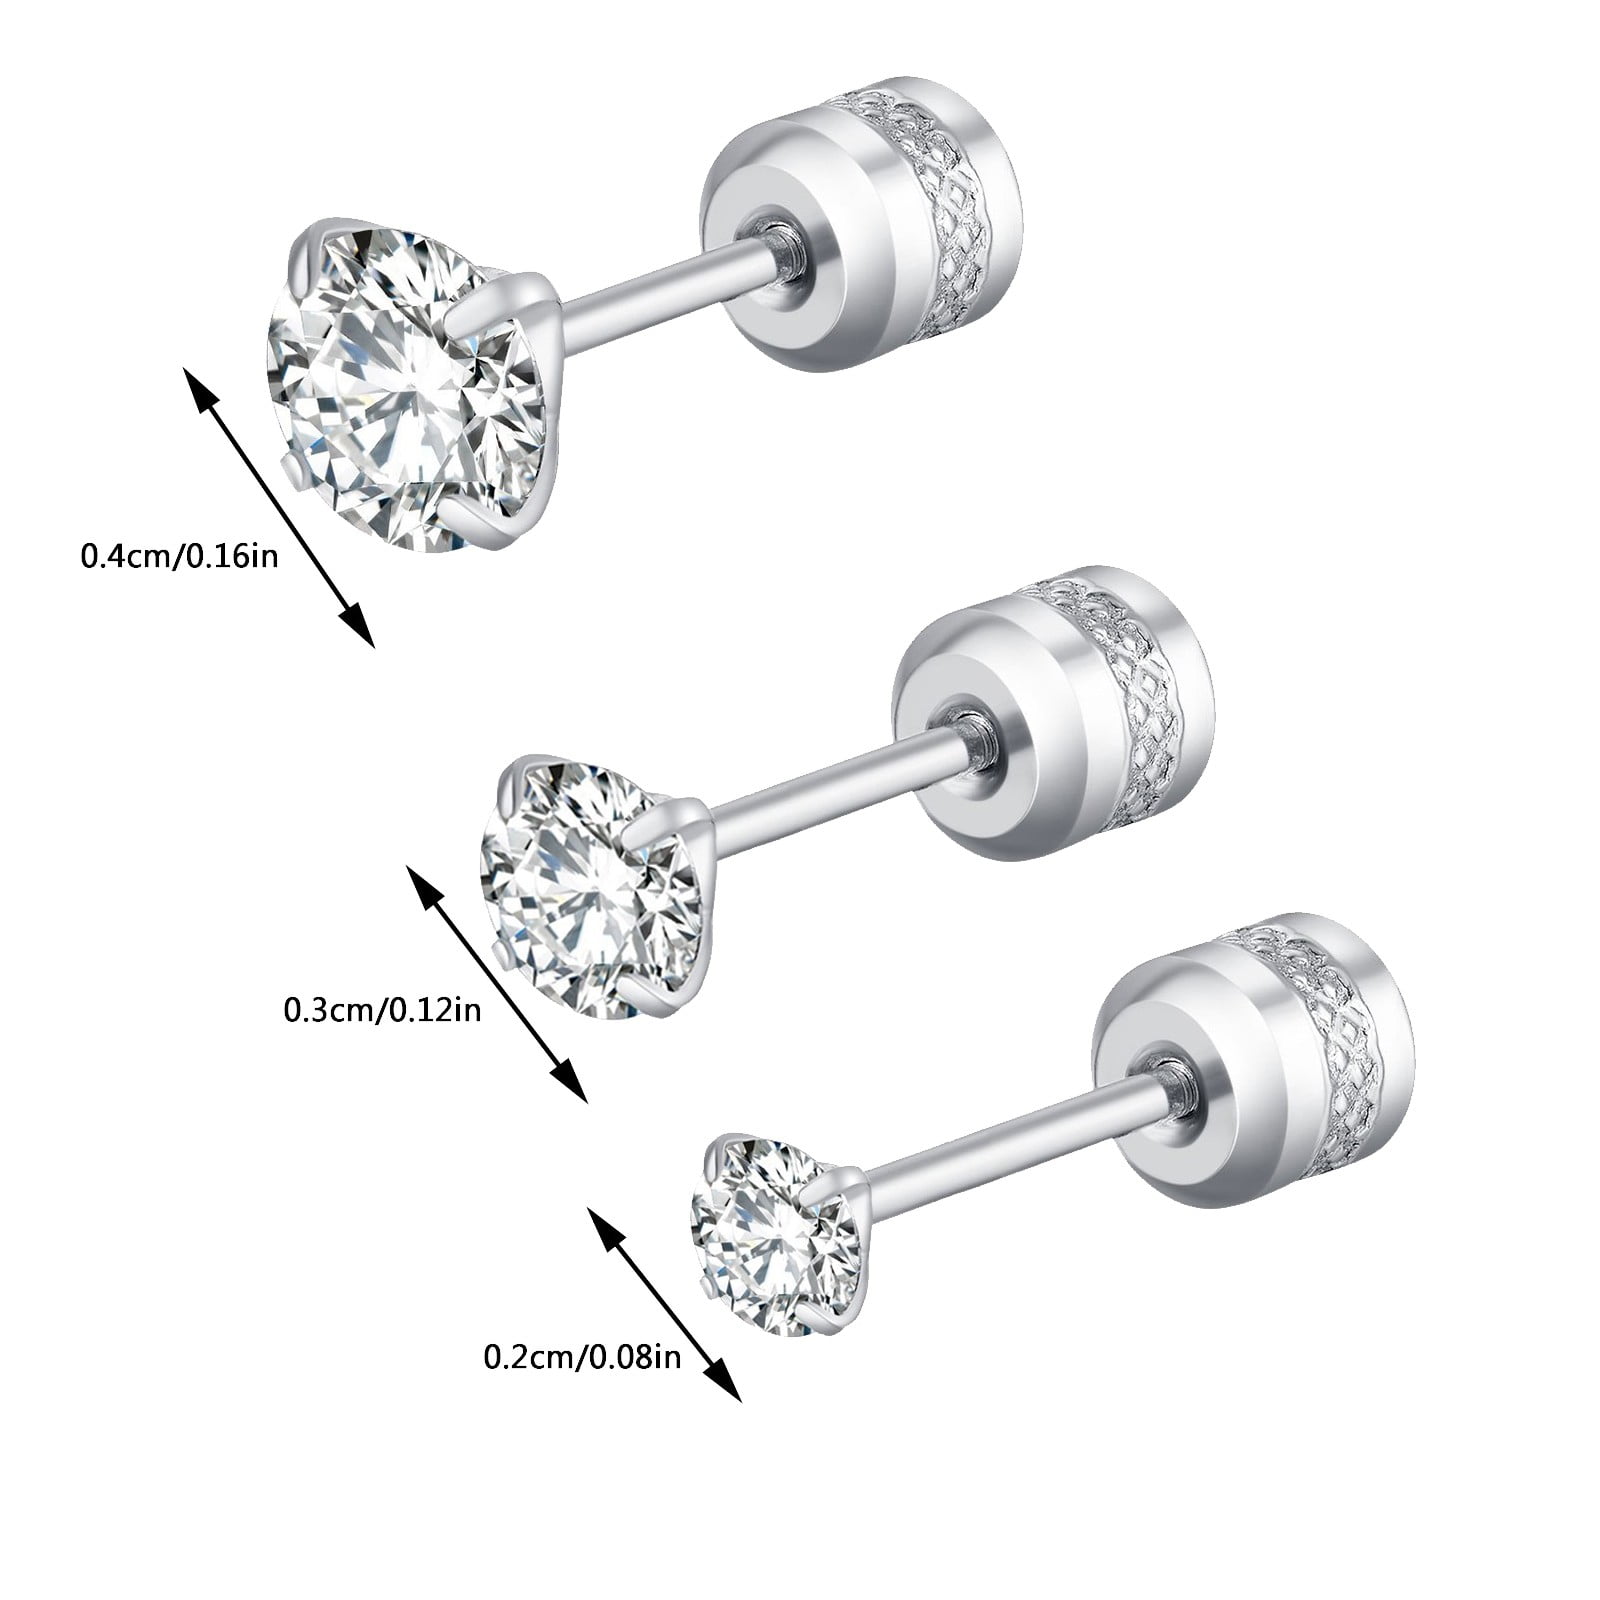 5 Ct Moissanite Diamond Stud Sterling Silver Earrings - DAEM0001. Free  Shipping, Easy 30 Days Returns and Exchange, 6 Month Plating Warranty.